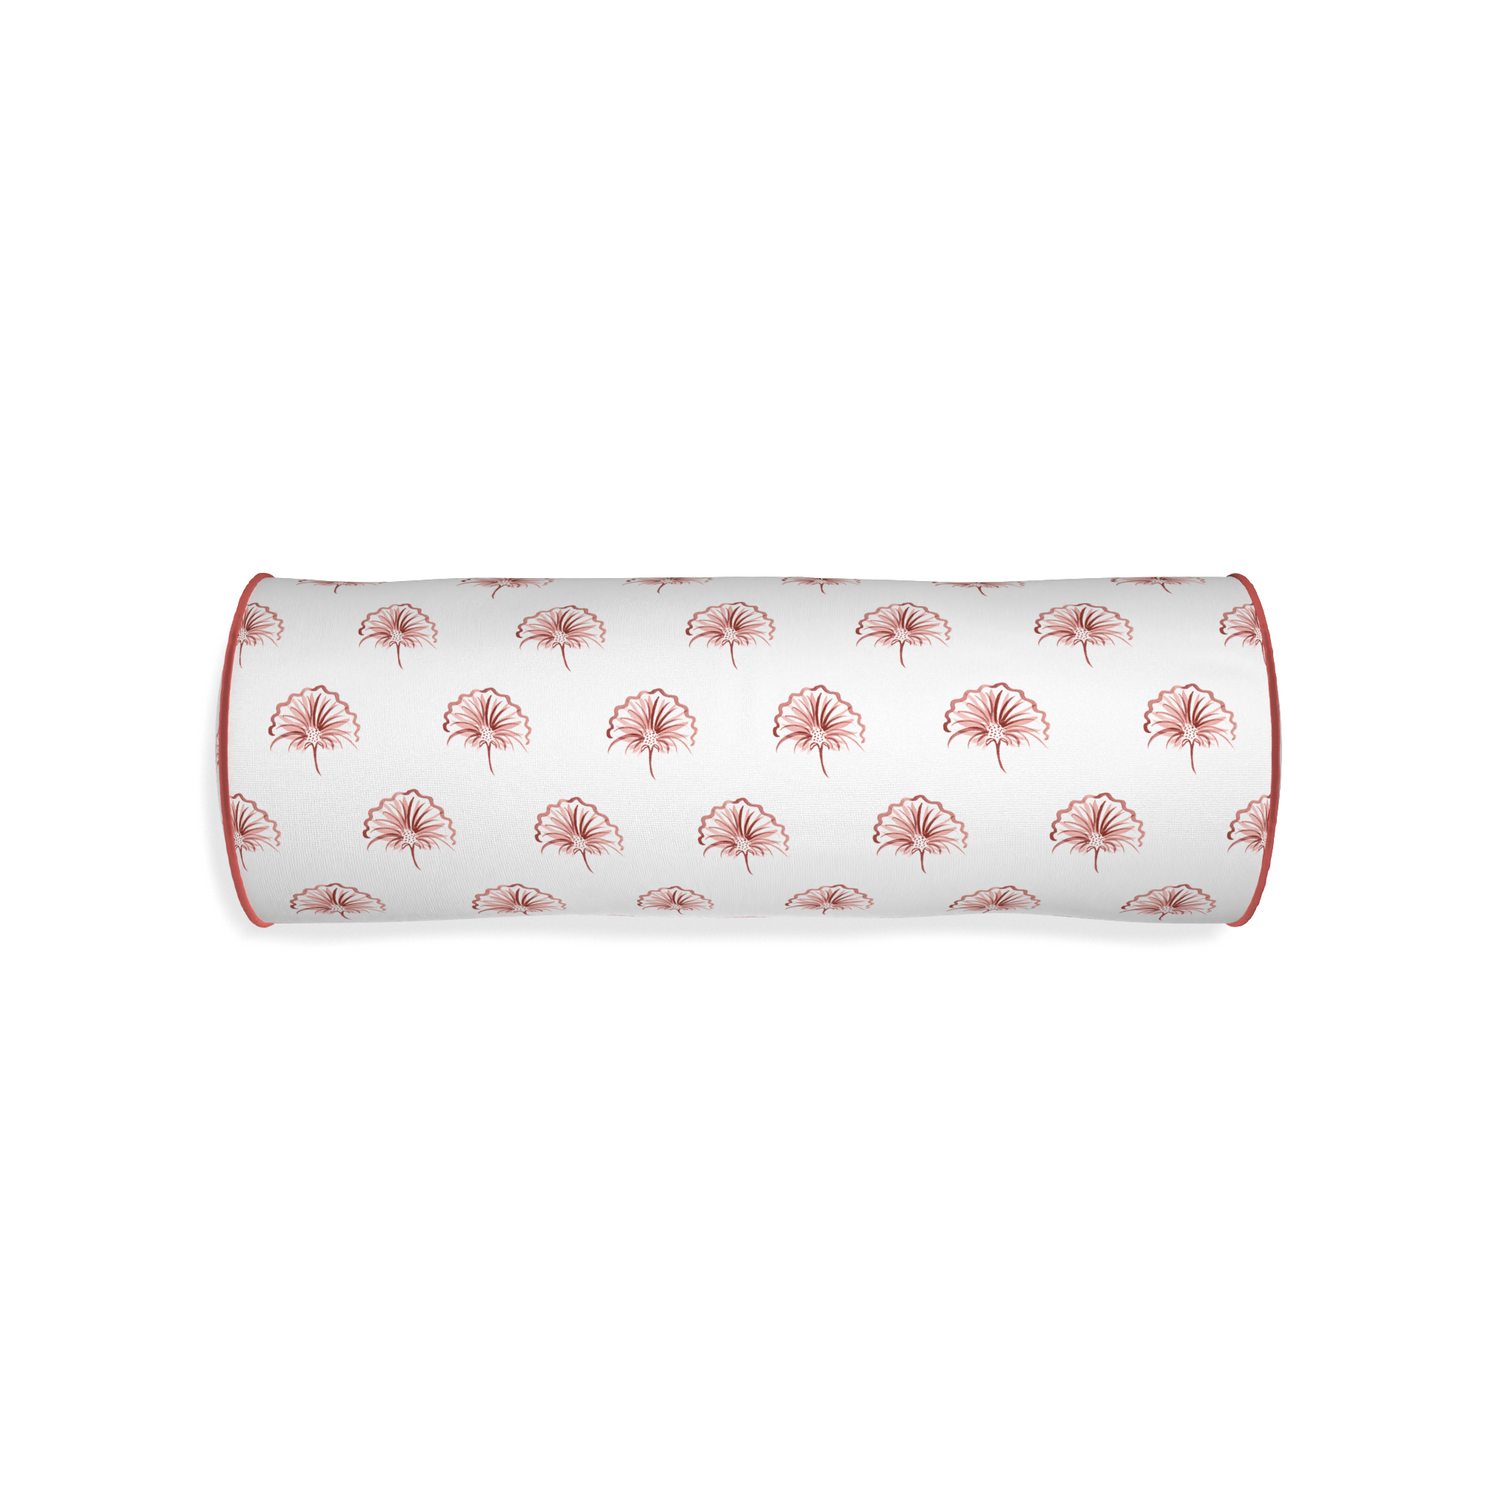 Bolster penelope rose custom pillow with c piping on white background